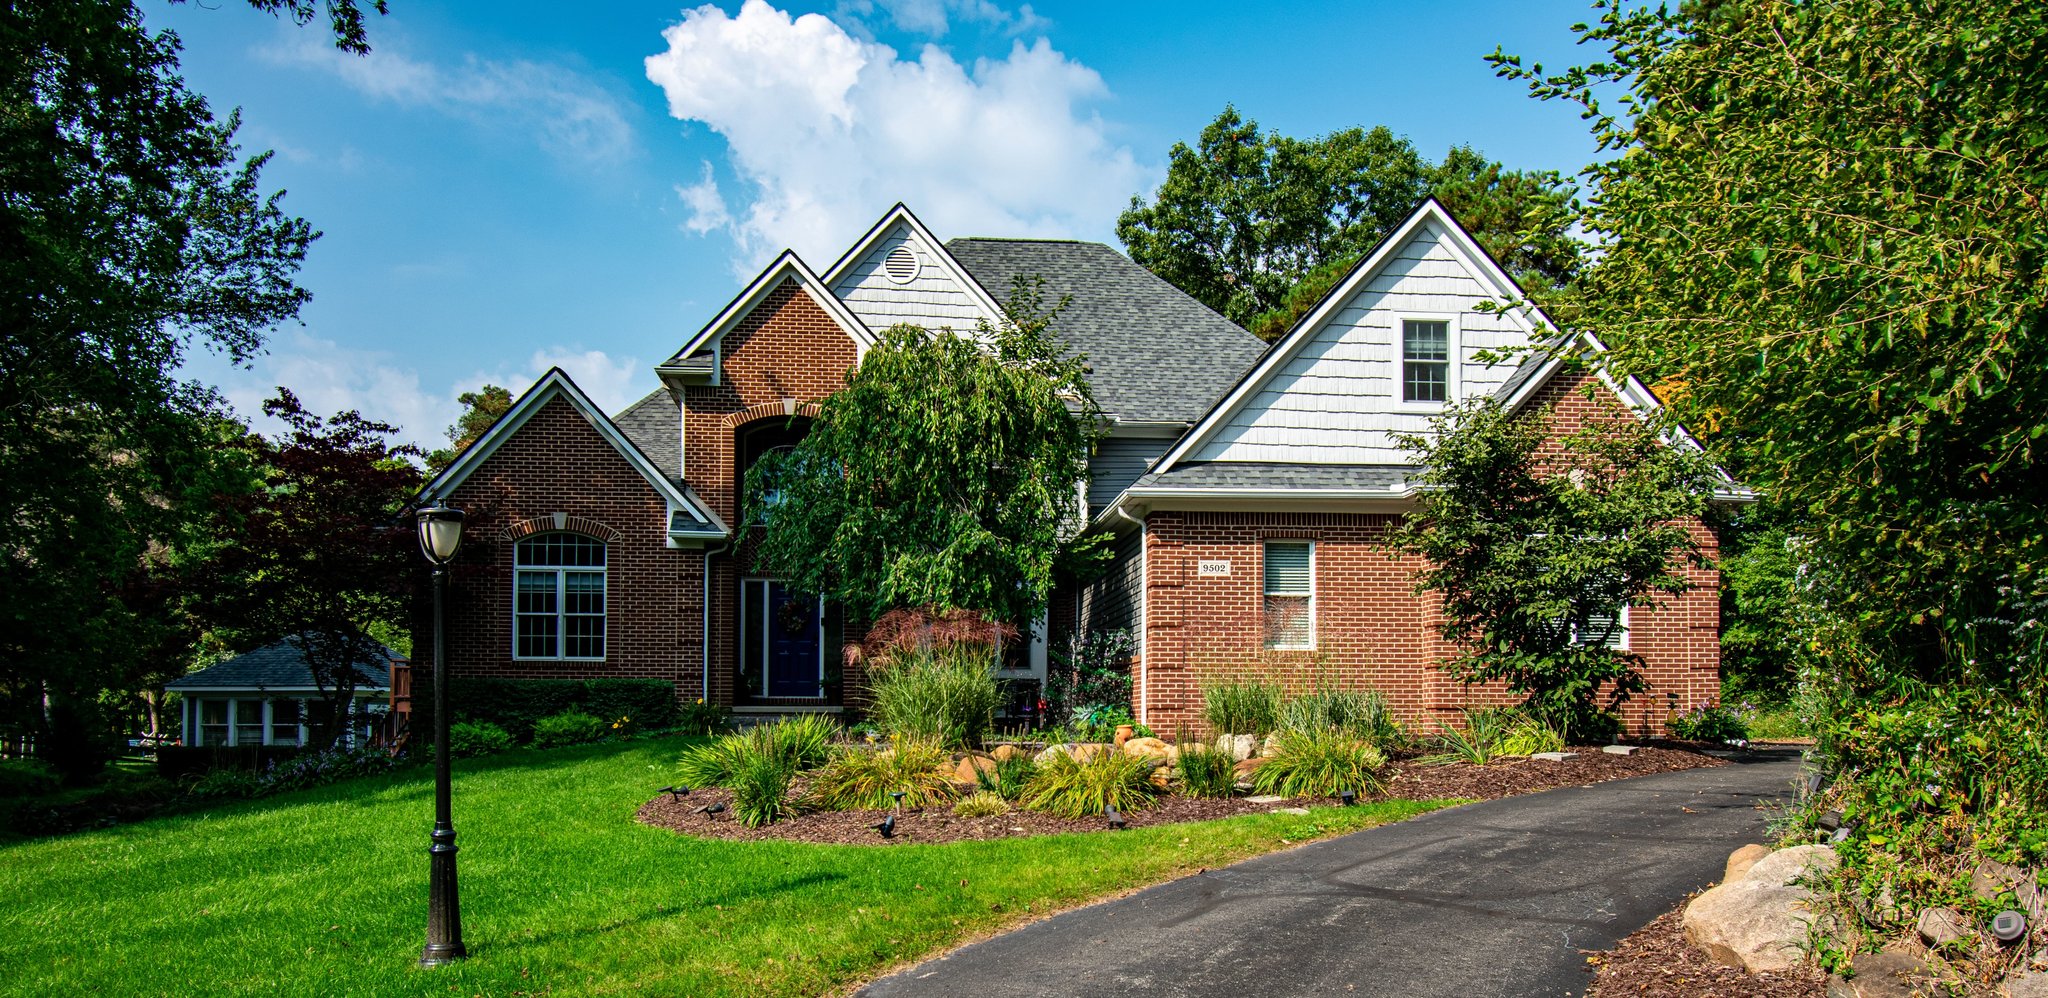 Whispering Pines Golf Course Neighborhood Homes